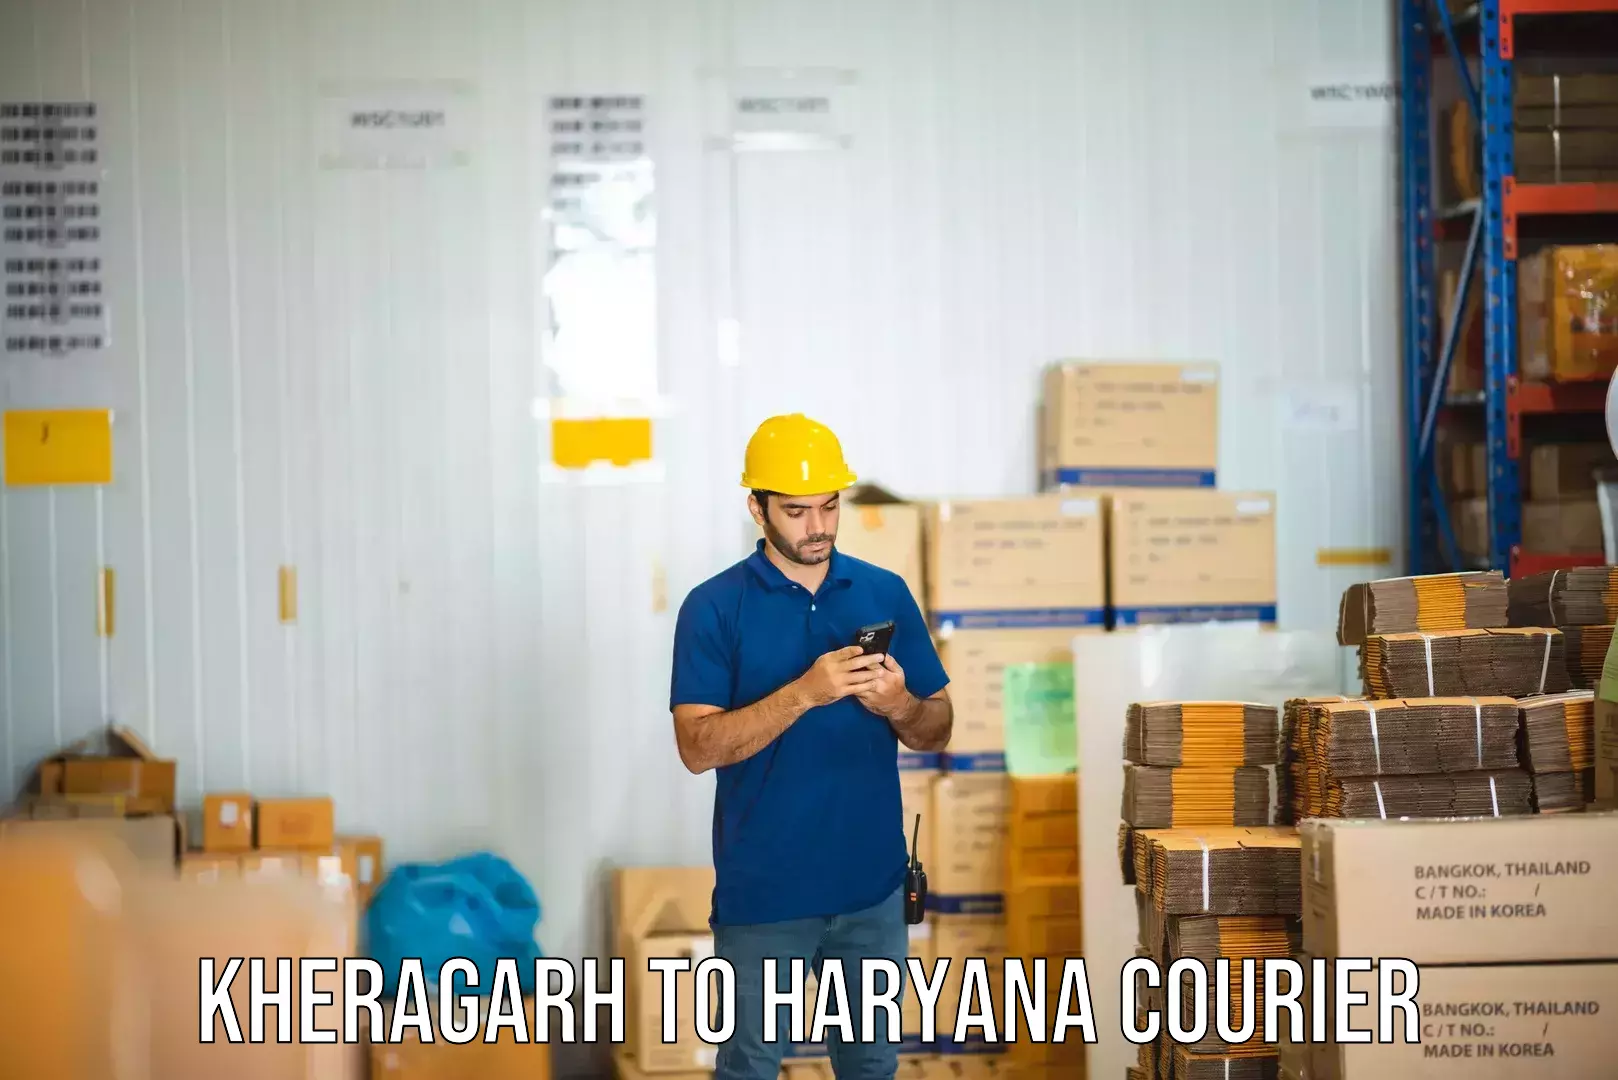 Professional parcel services Kheragarh to NCR Haryana